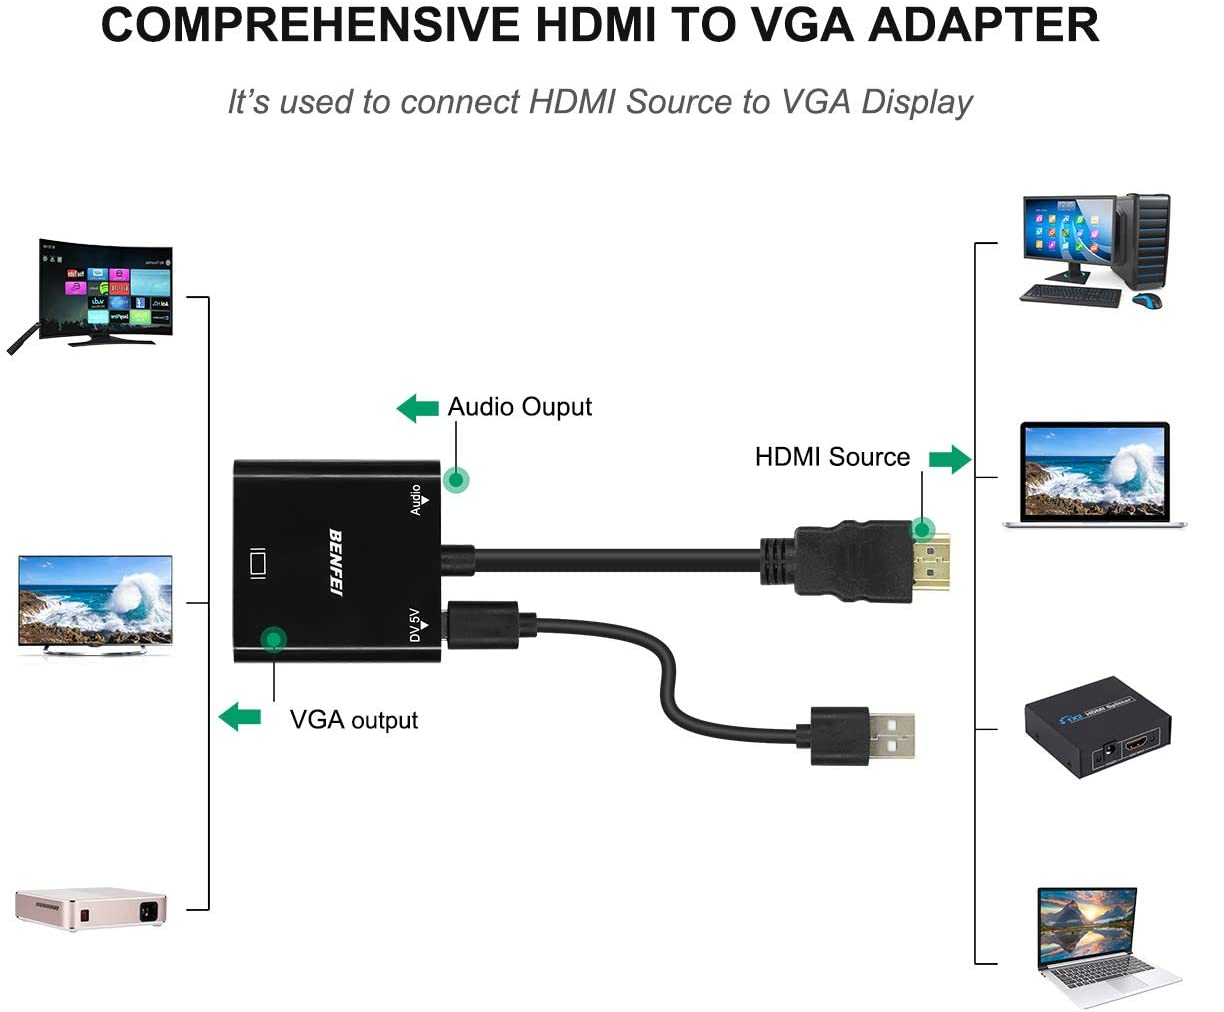 Moread Hdmi To Vga, Gold-Plated Hdmi To Vga Adapter (Male To Female) For  Computer, Desktop, Laptop, Pc, Monitor, Projector, Hdtv, Chromebook